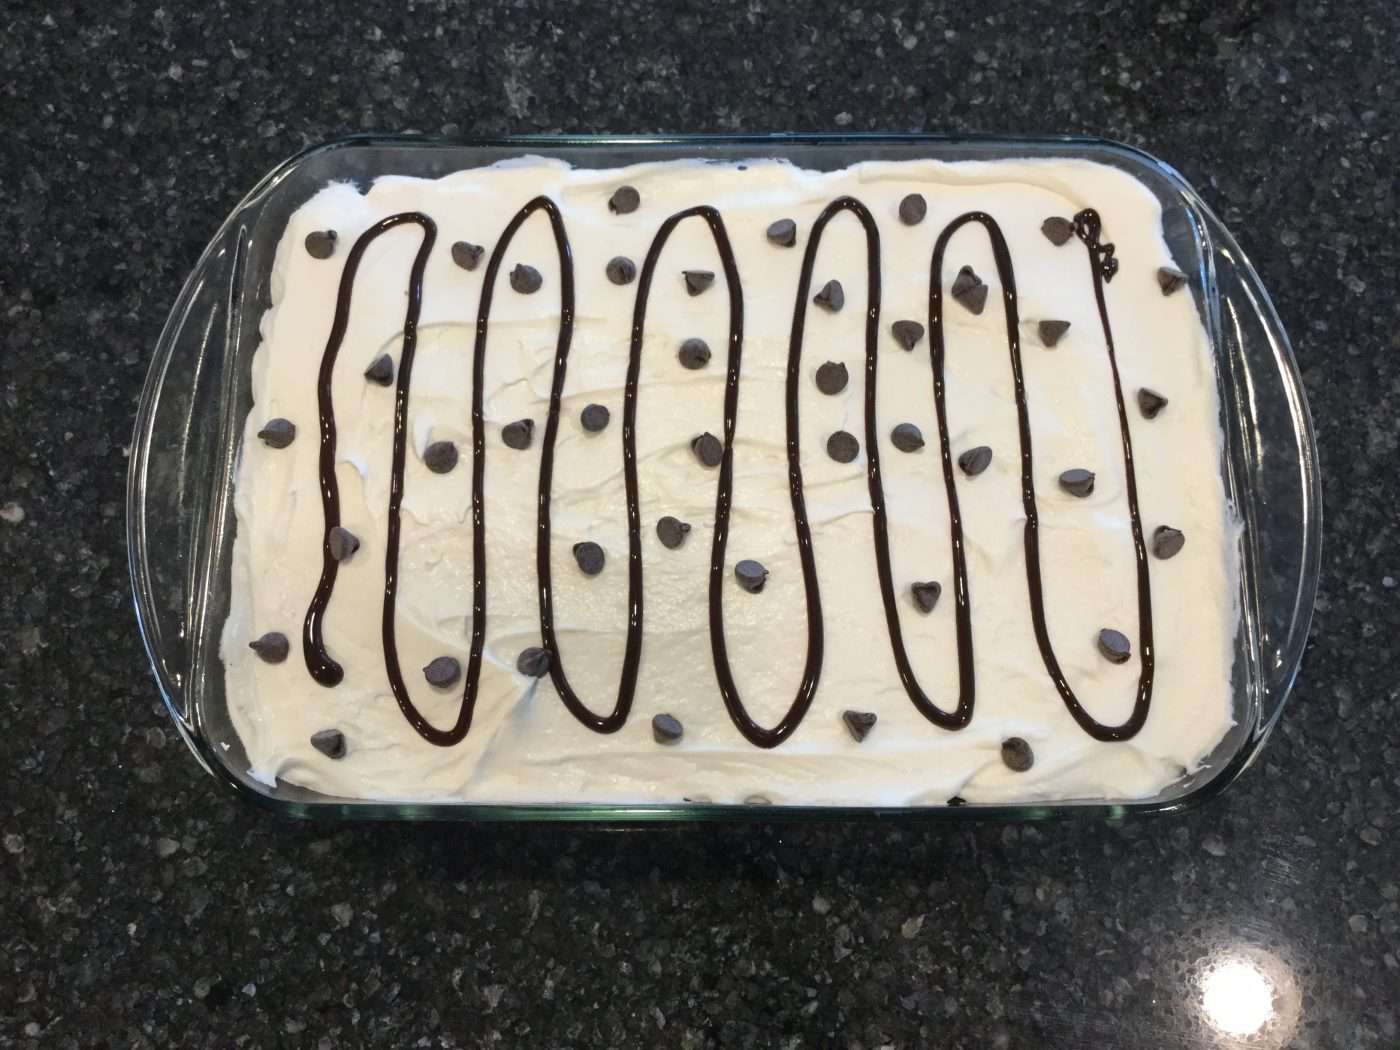 Decorate the top with drizzled chocolate syrup, chopped chocolate (I used chocolate chips), or leave plain. The cake is ready to eat. If you are not eating it right away it is best to keep it in the refrigerator until ready to serve.